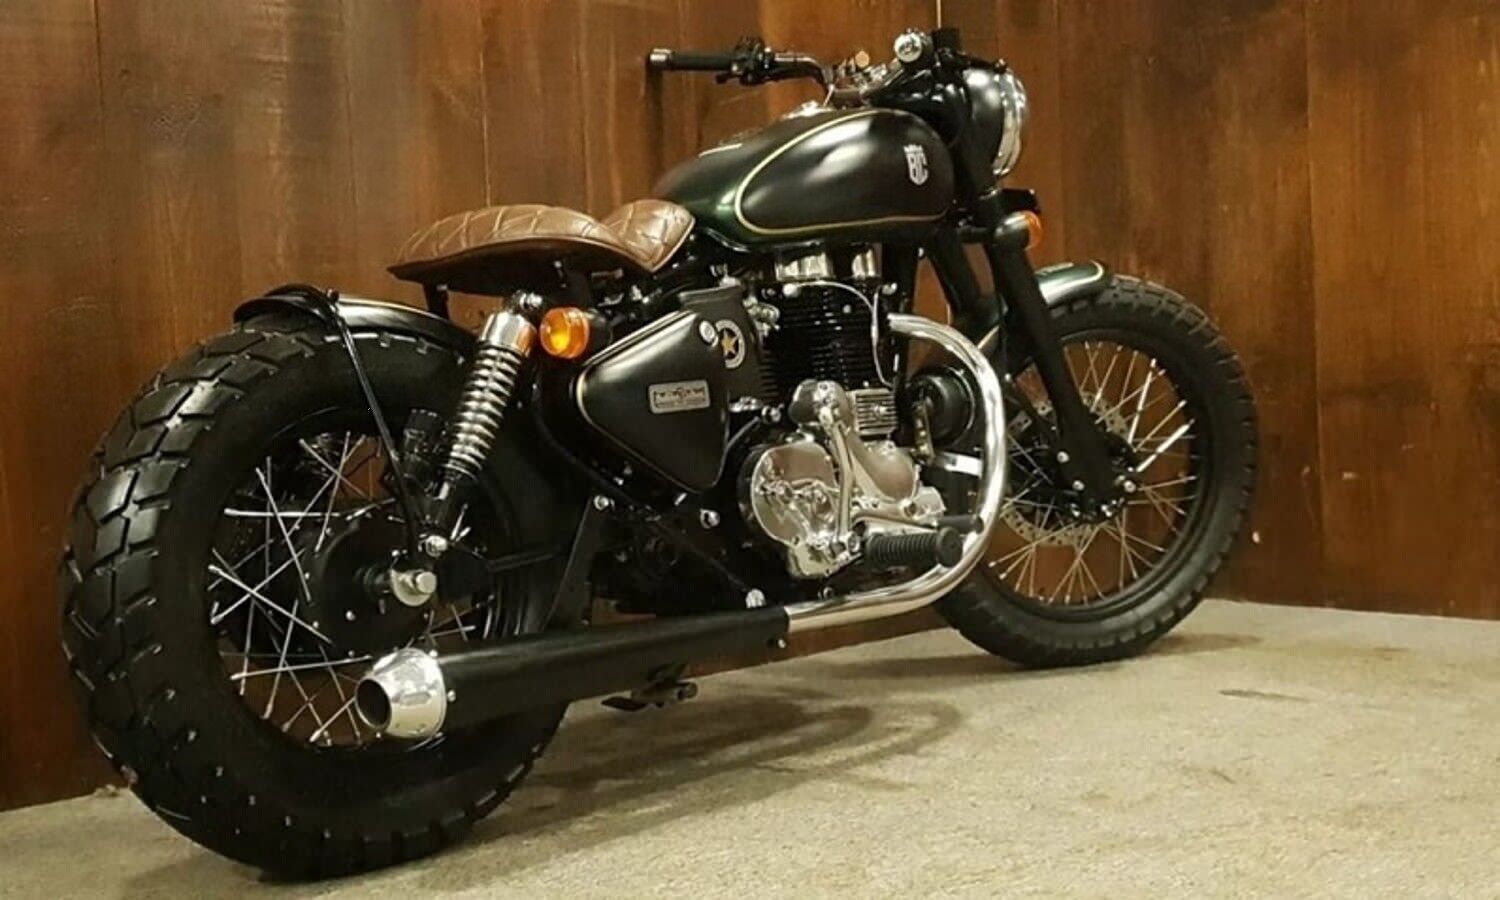 Bullet 350 Bike: Now bring Bullet home for just Rs 9000, the company took out this great offer